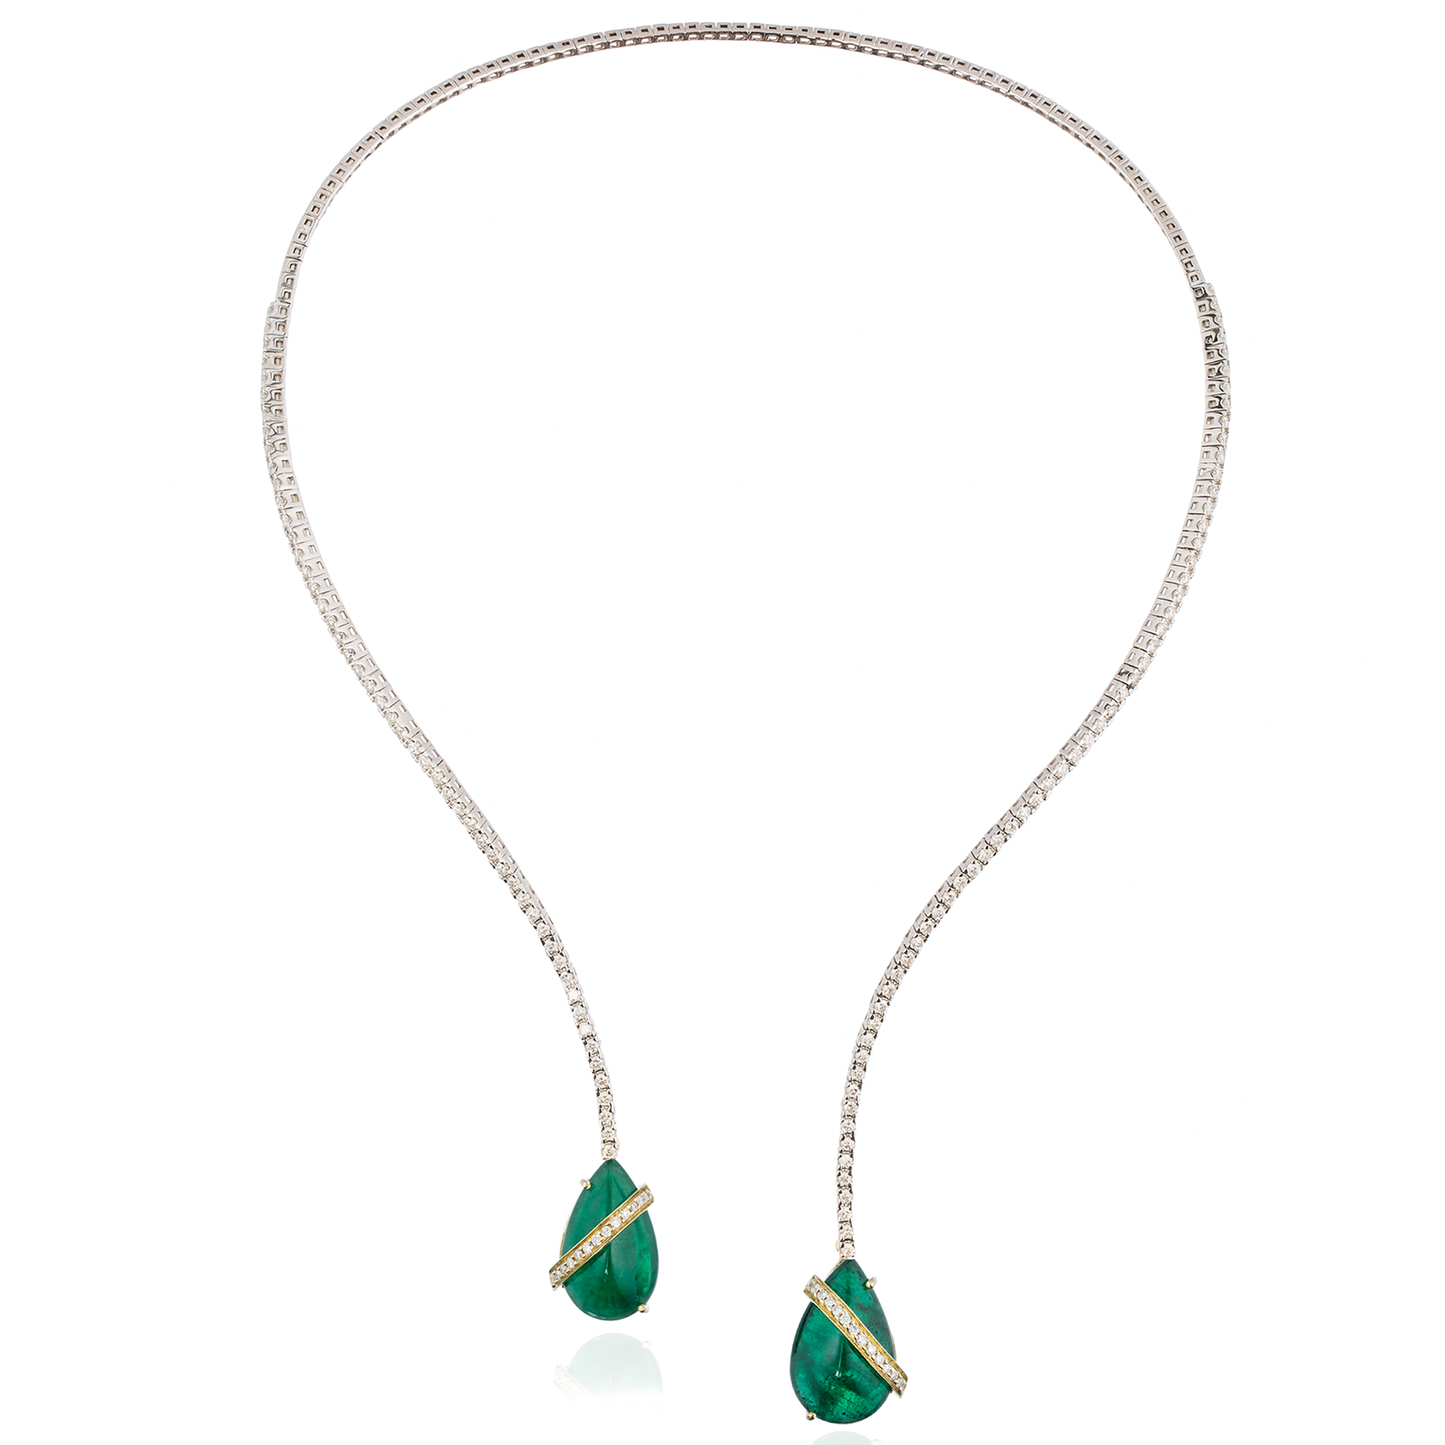 18k White Gold Necklace with Emerald Cabochon